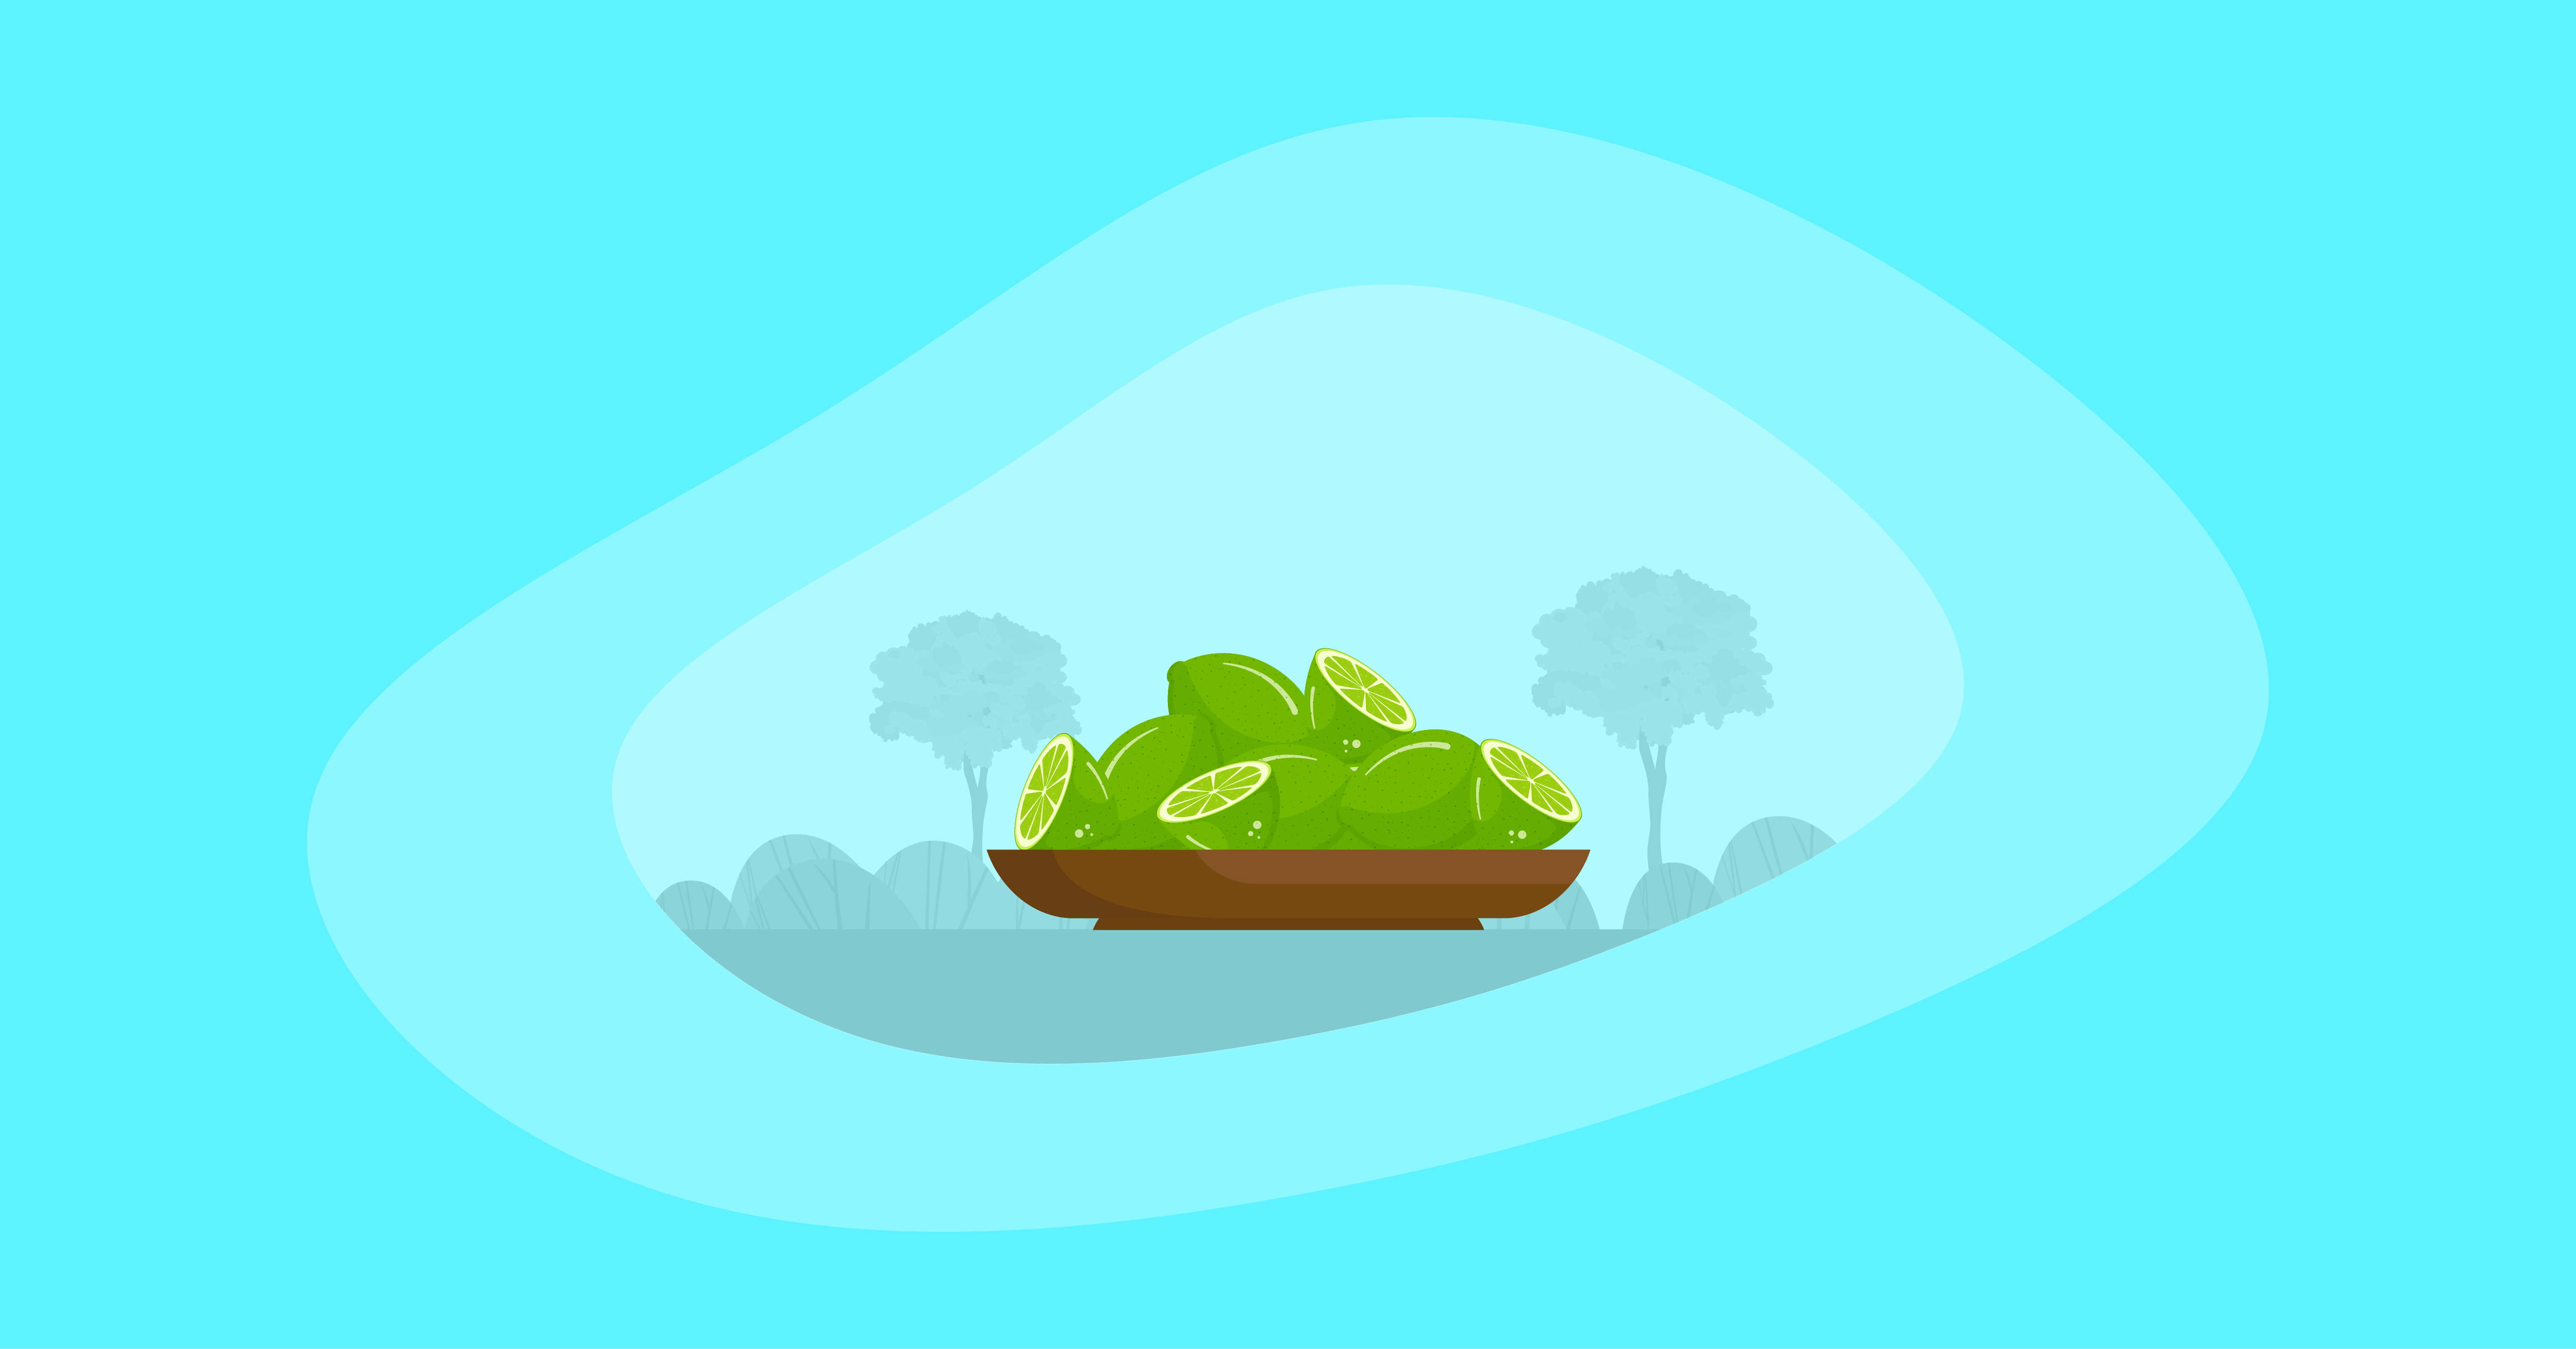 Illustration of limes in a wooden platter